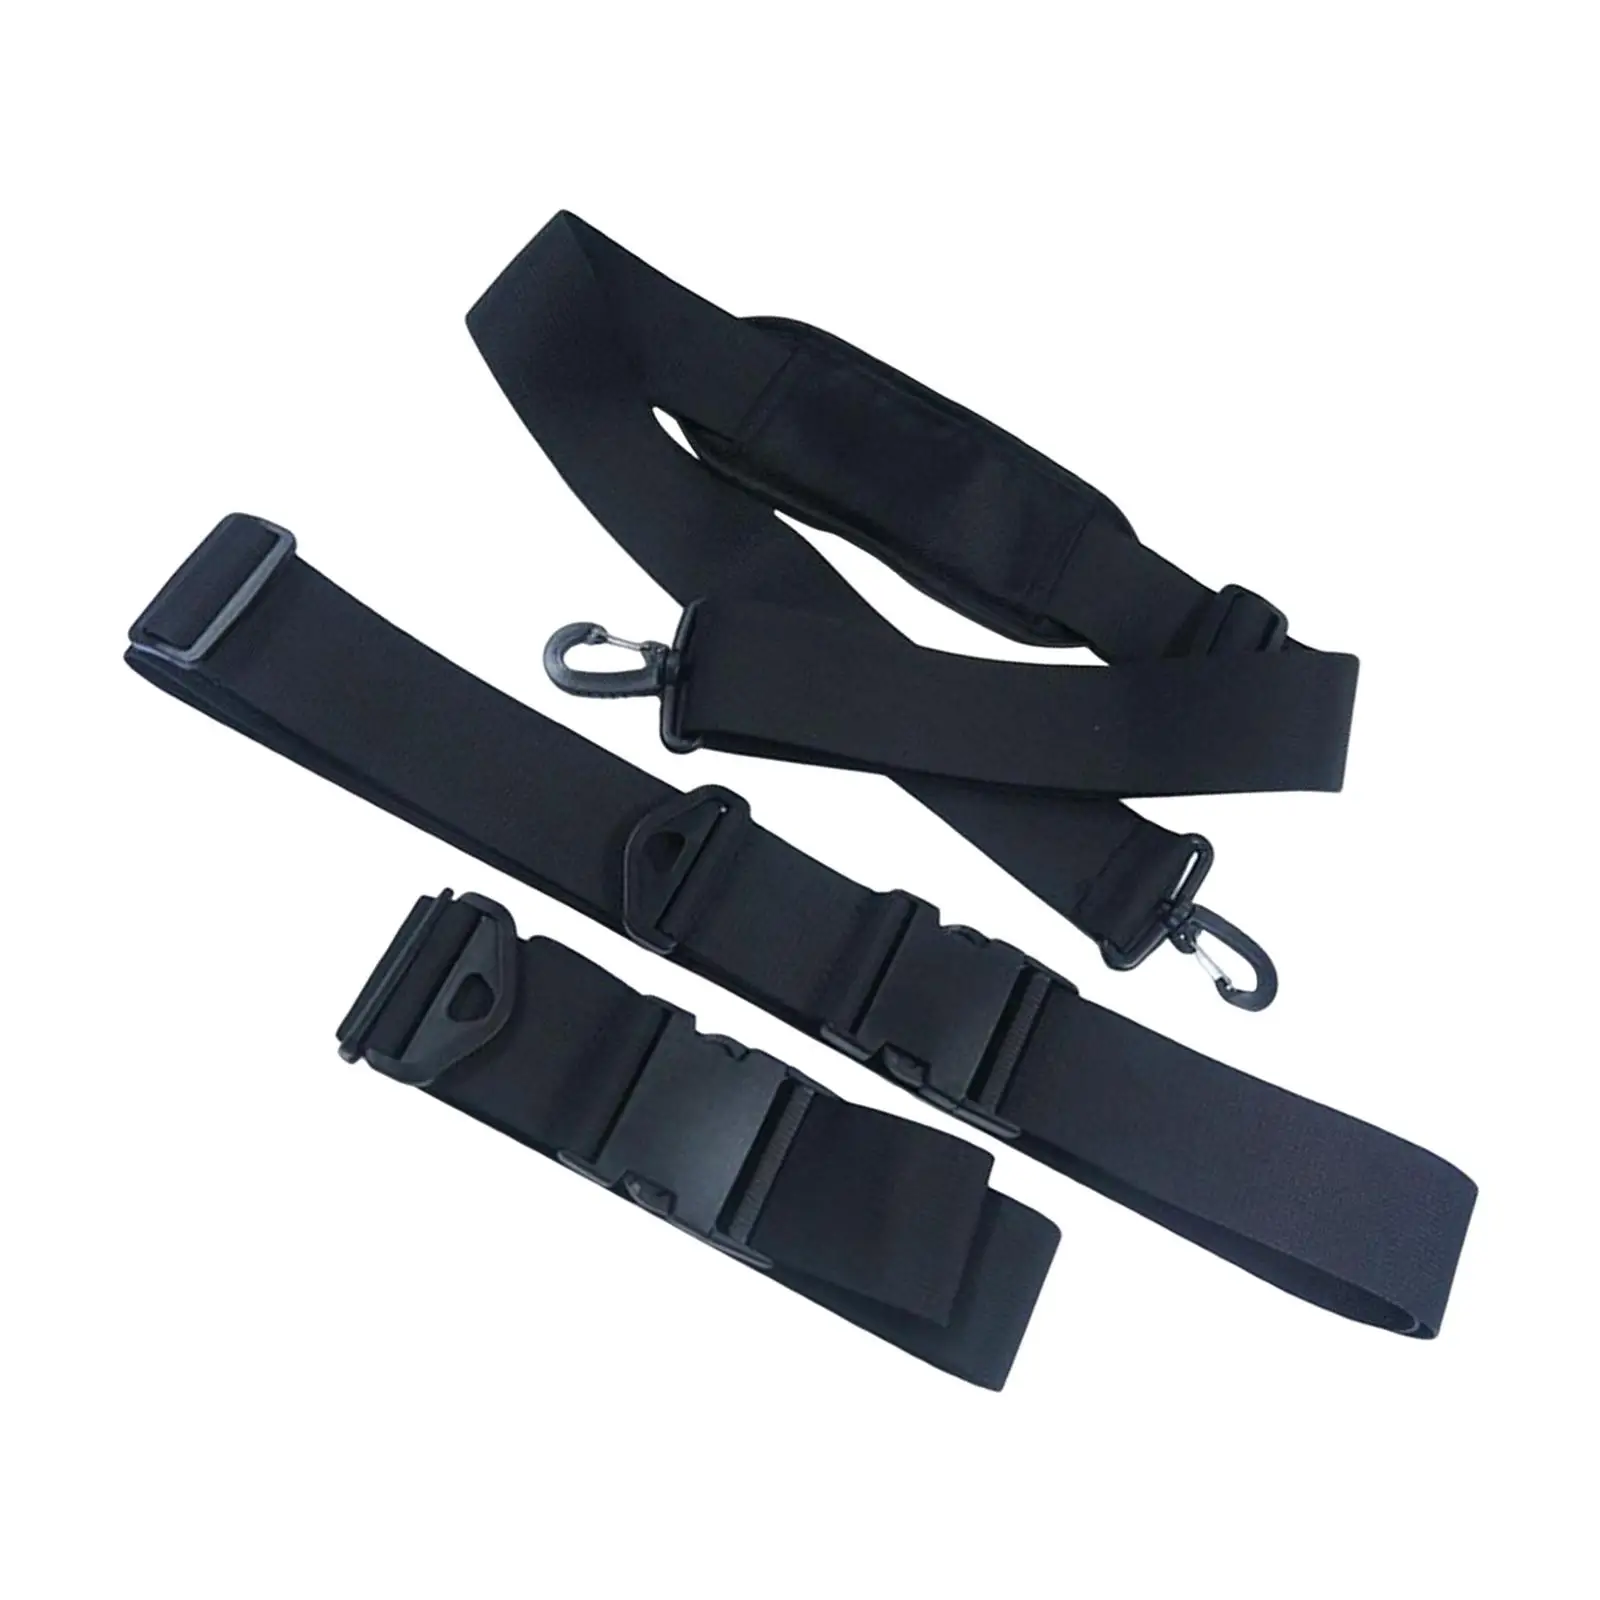 Carrying Sling Carrier Outdoor with Metal Hooks Paddle Board Shoulder Strap